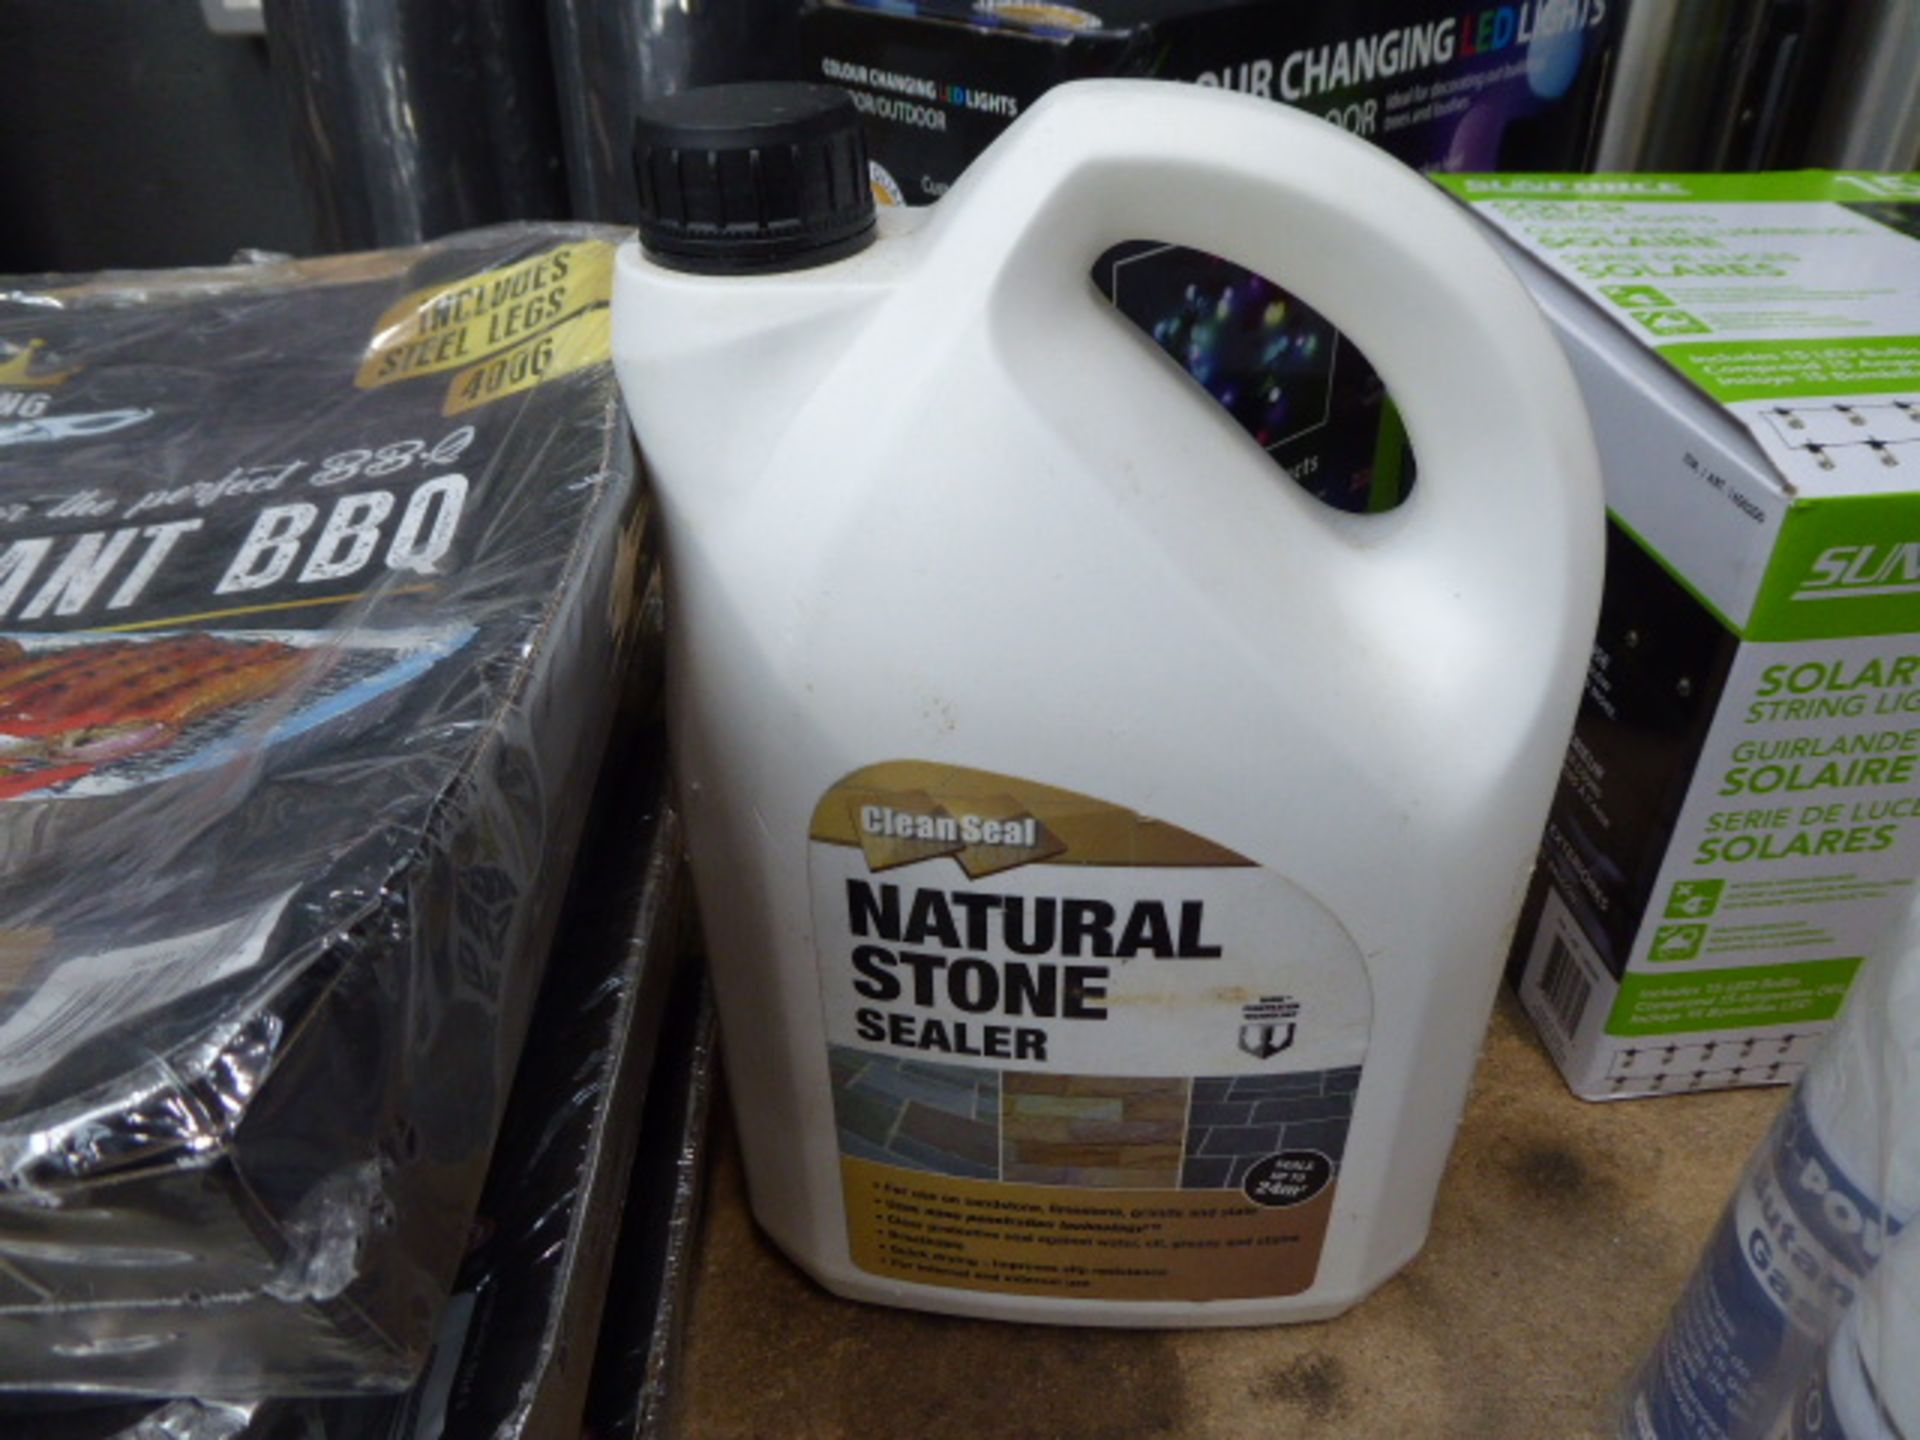 5 small instant BBQs, butane gas, and natural stone sealer - Image 4 of 4